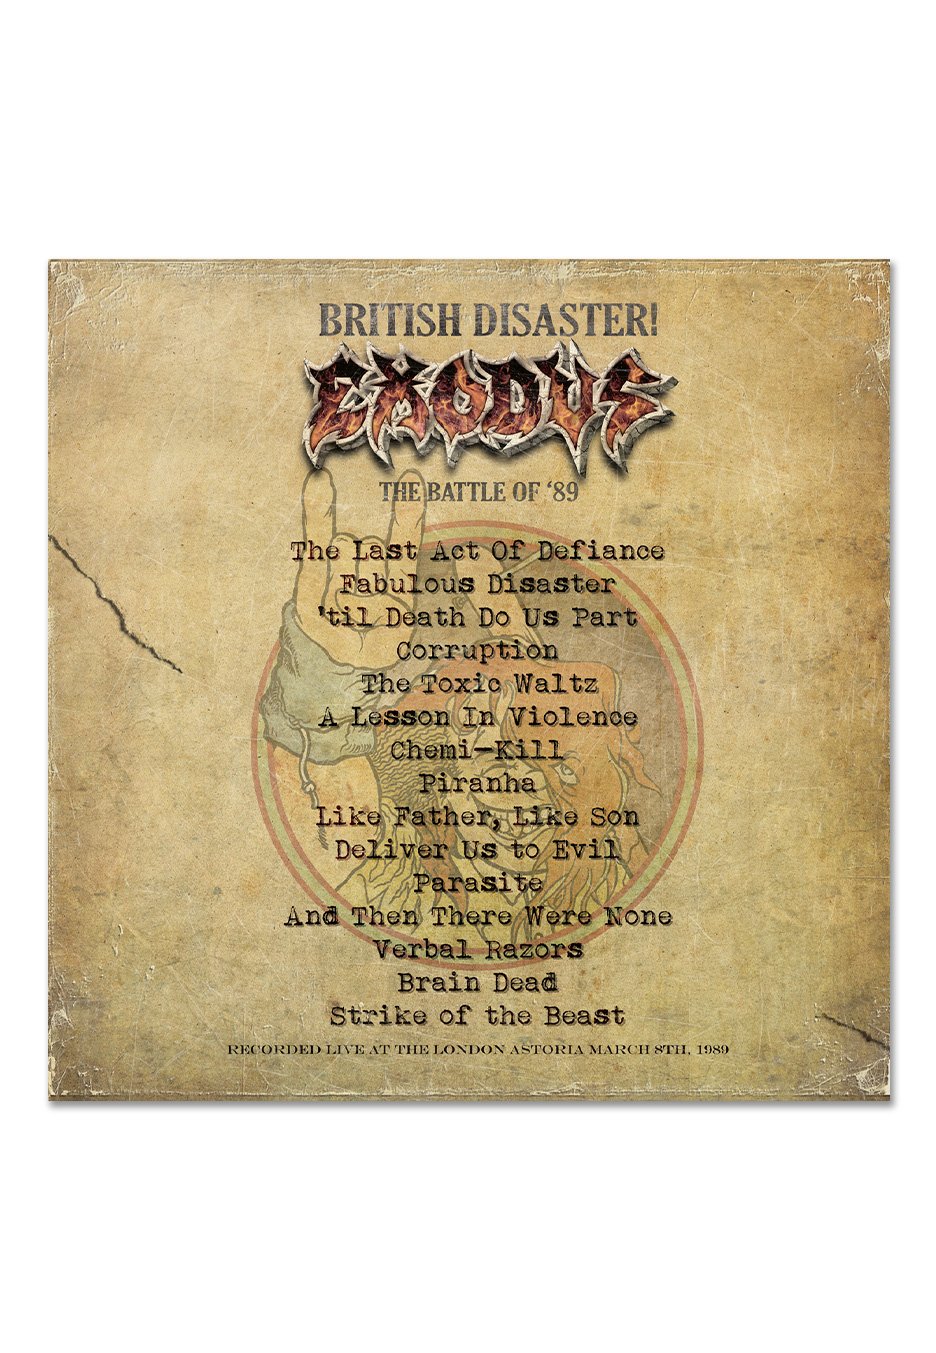 Exodus - British Disaster: The Battle Of '89 (Live At The Astoria) - CD